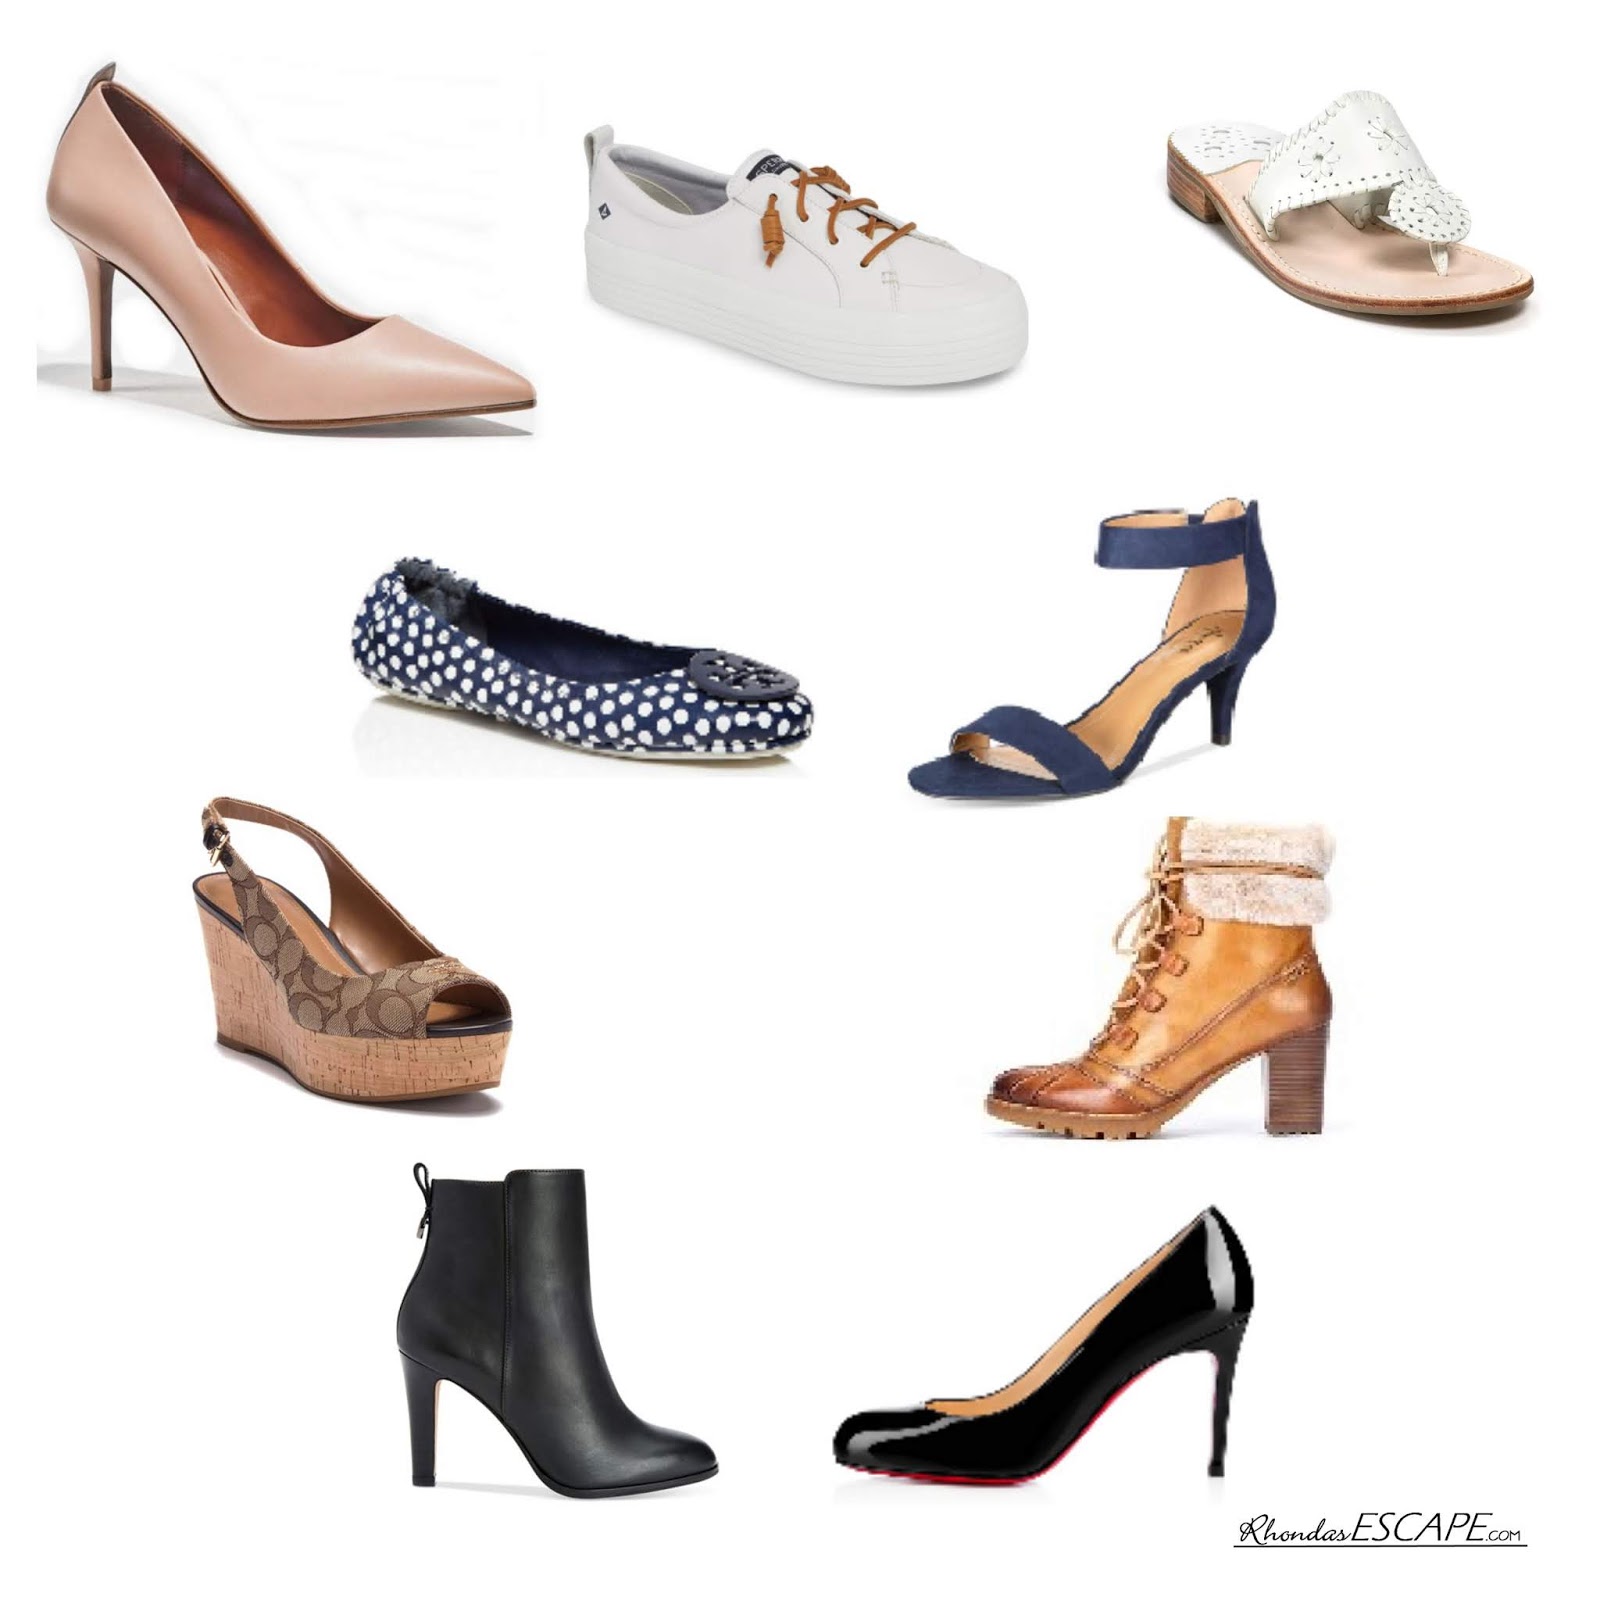 10 Must-Have Shoes Every Woman Should Own